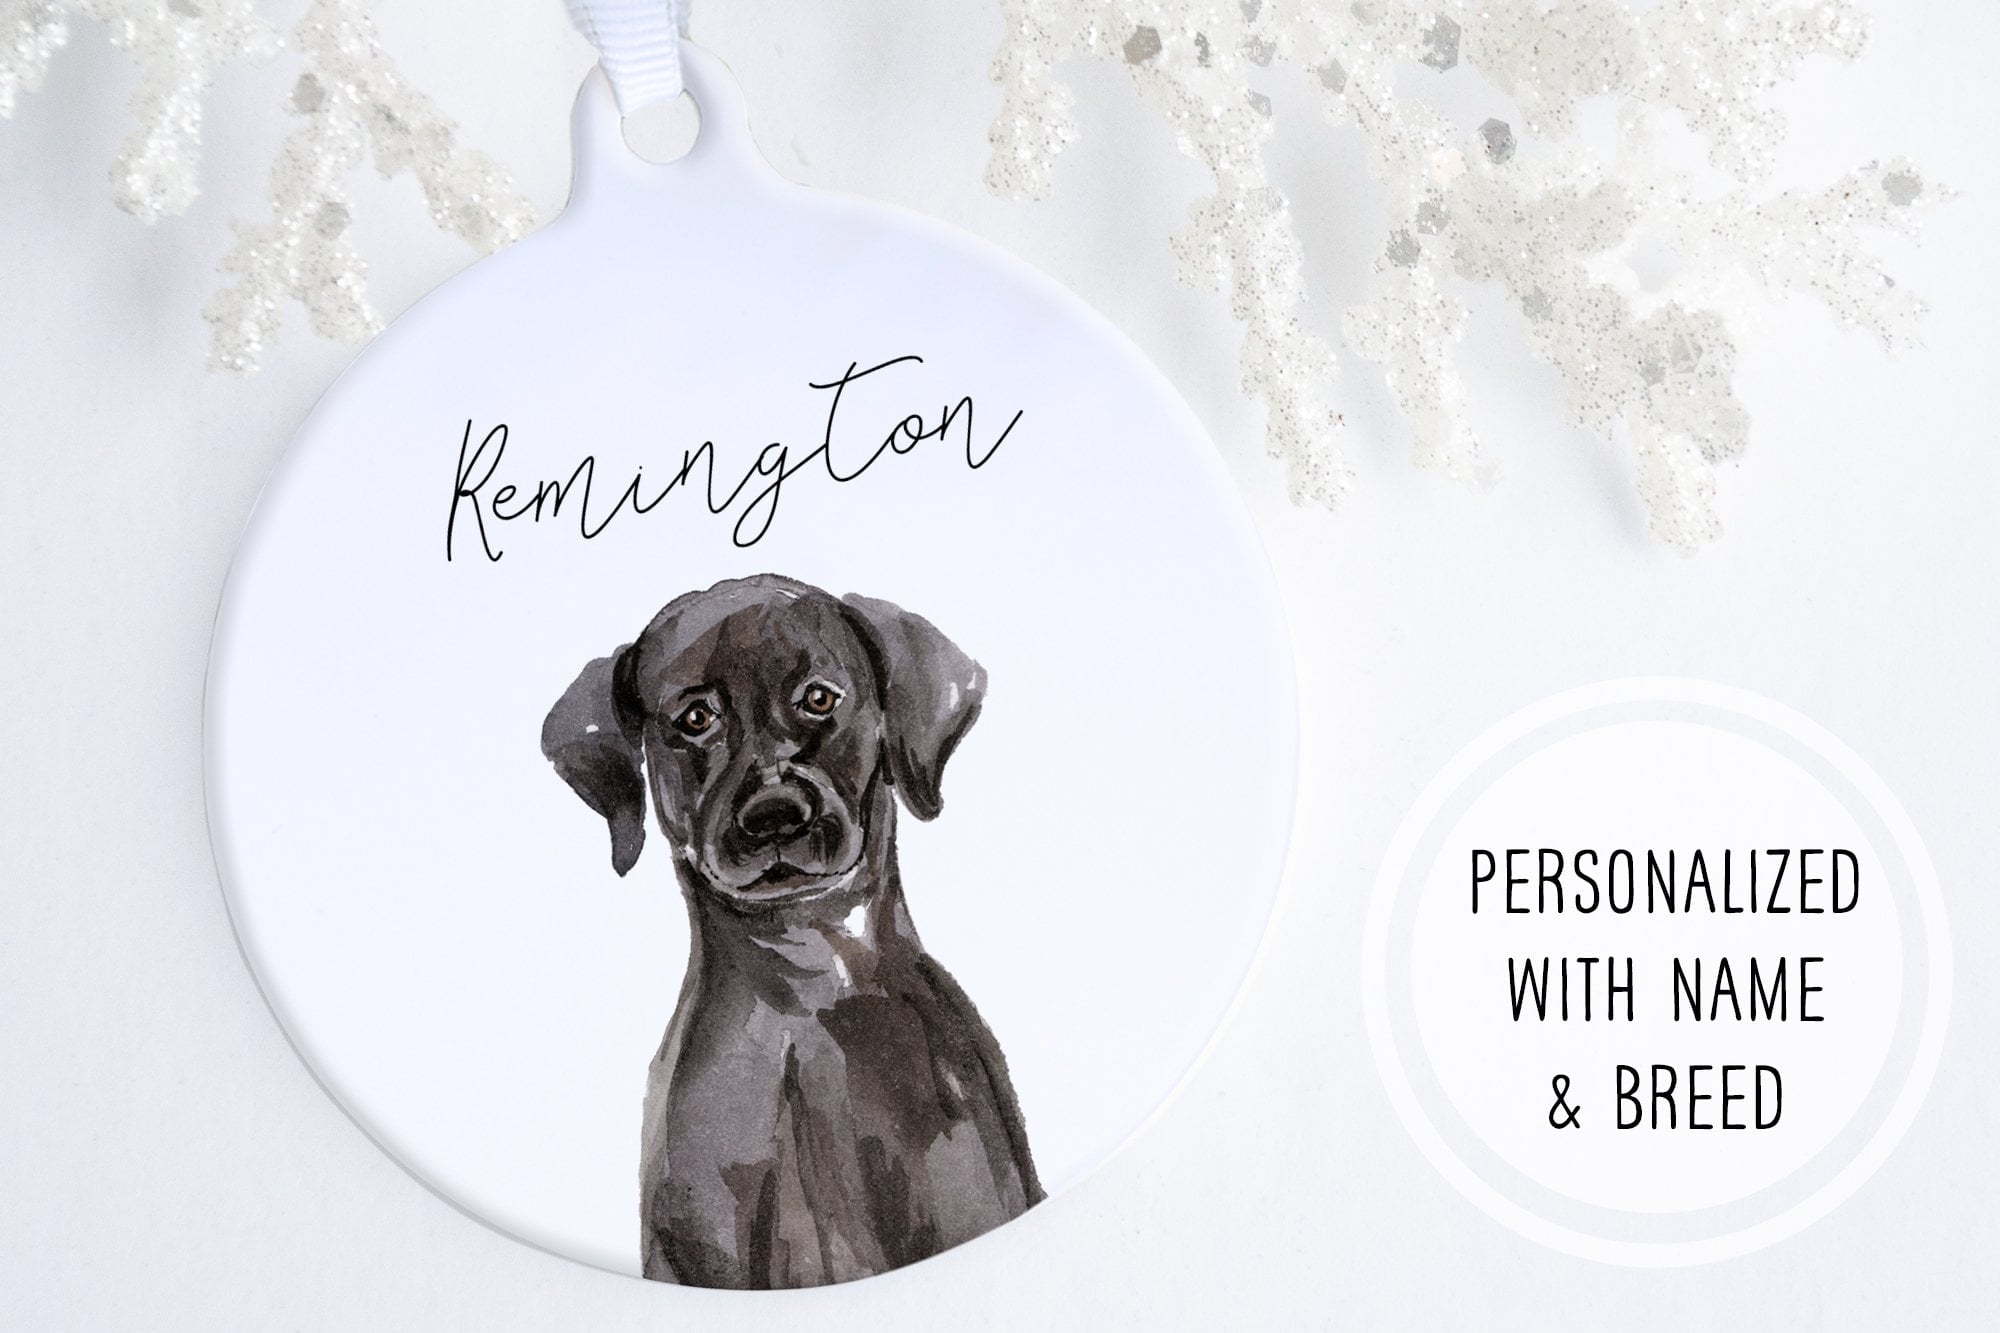 Personalized Dog Ornament | Ollie + Hank